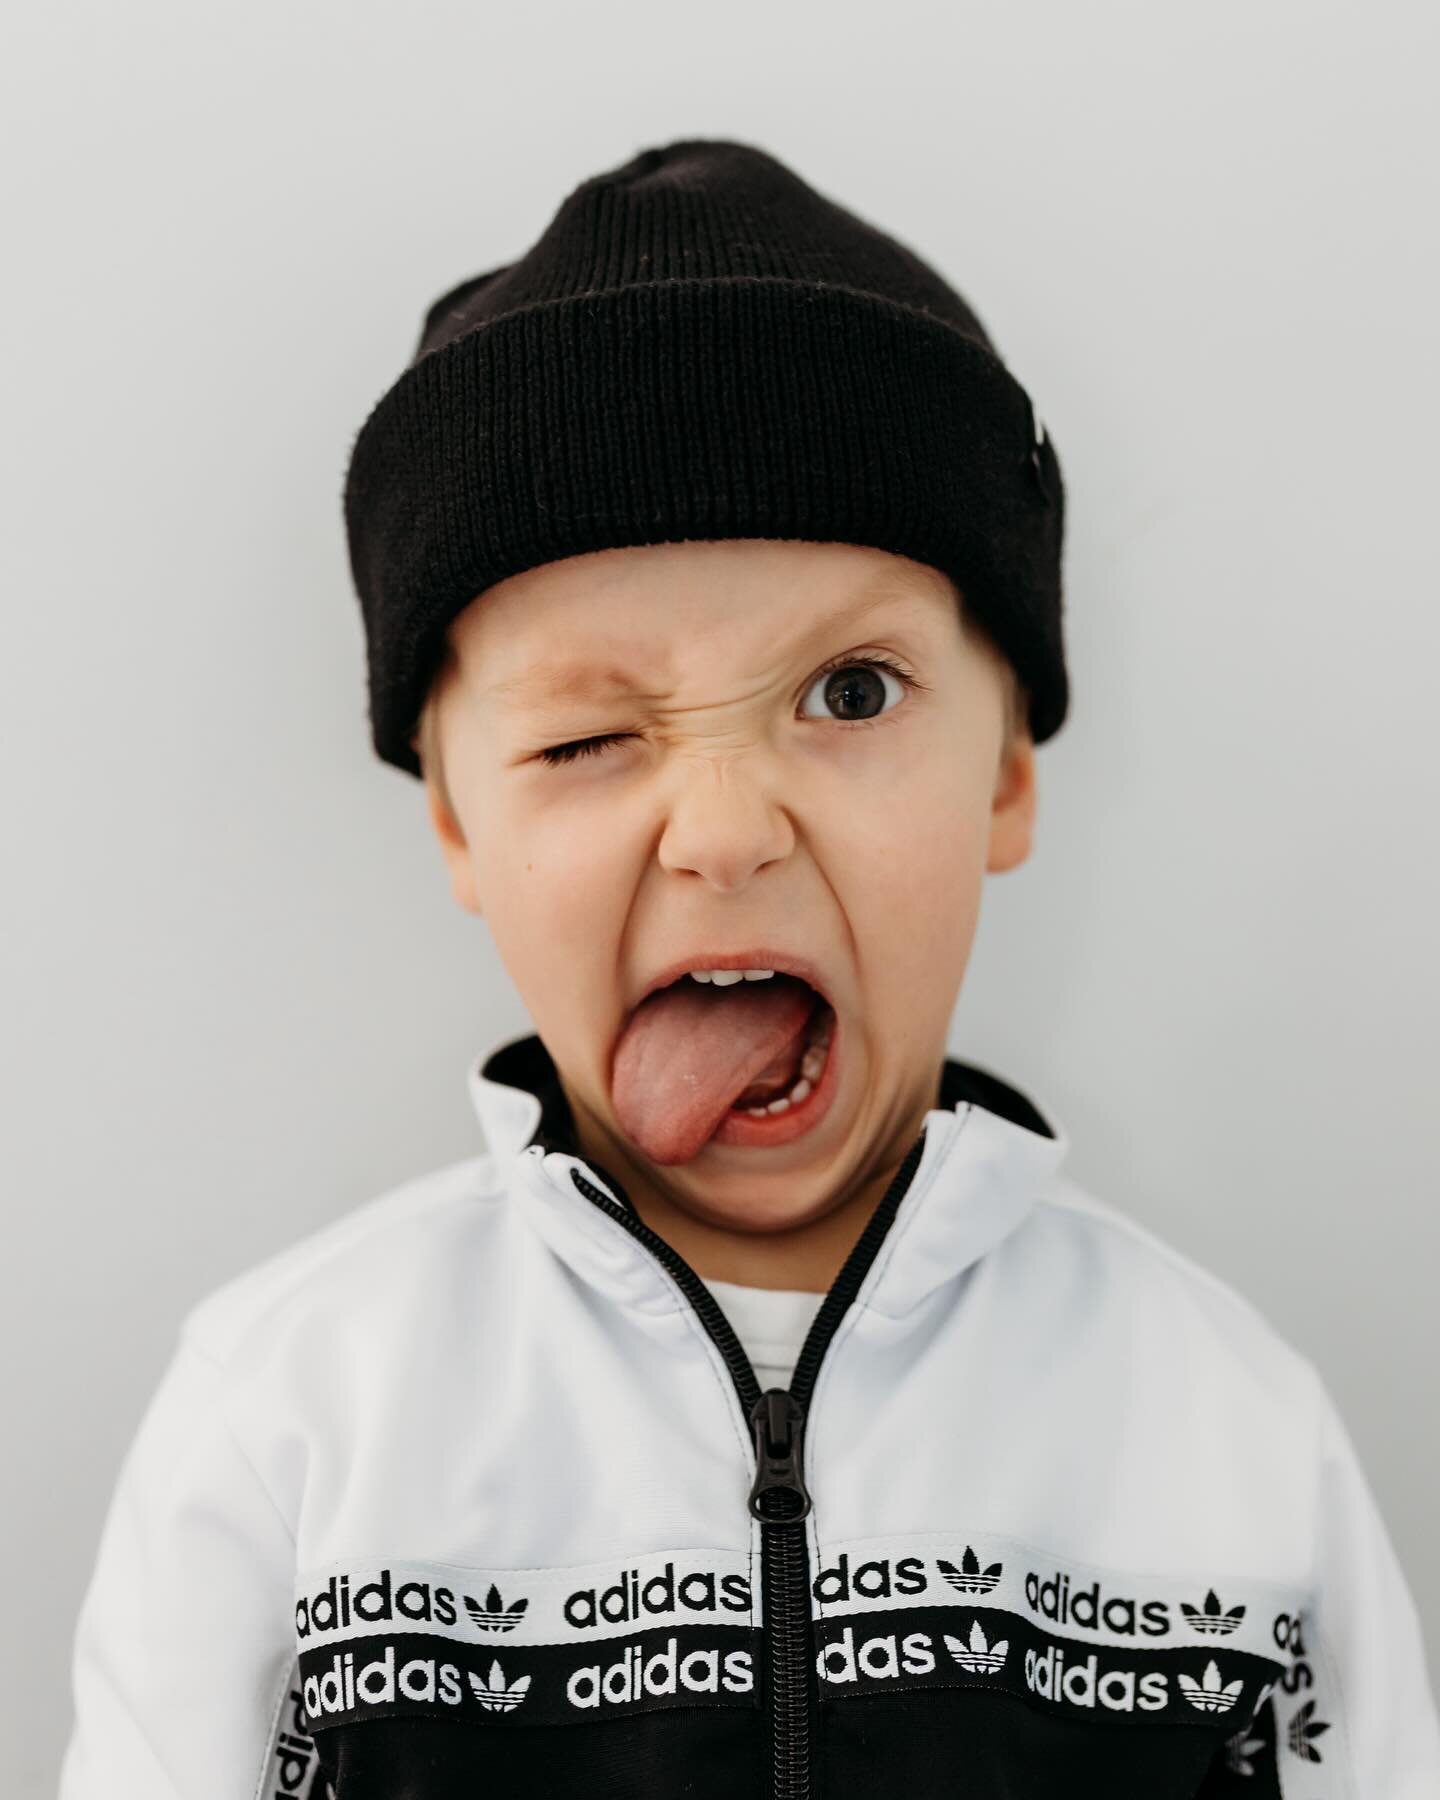 Life&rsquo;s too short for boring portraits of your kiddos, amirite?

The kids and I did an impromptu portrait session last weekend and I&rsquo;m obsessed with how their photos turned out! 

Sometimes all you need is a simple backdrop and the sillies